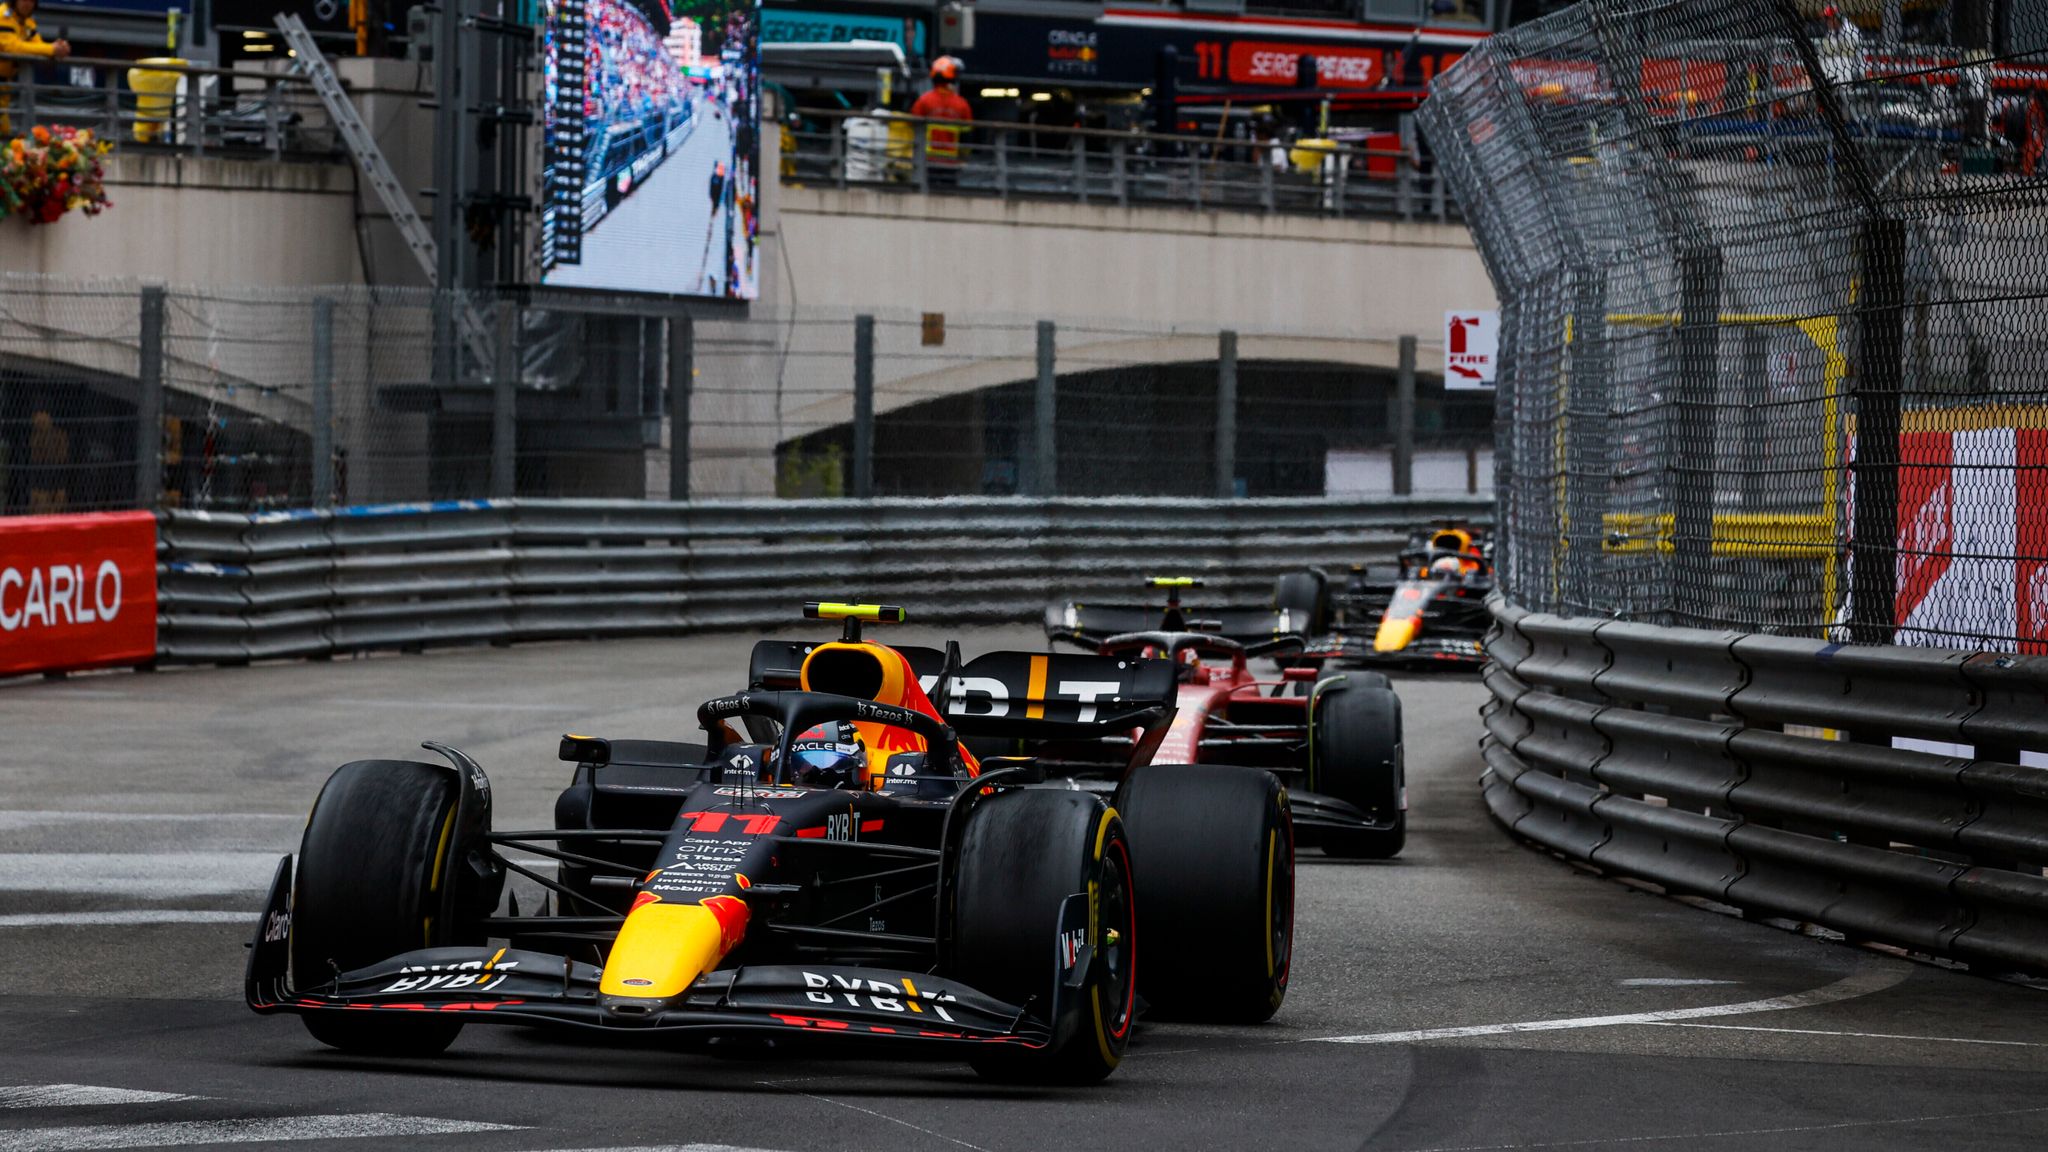 F1 Monaco Grand Prix Track Guide - What You Need To Know Ahead Of This 2023  Weekend - F1 Briefings: Formula 1 News, Rumors, Standings and More